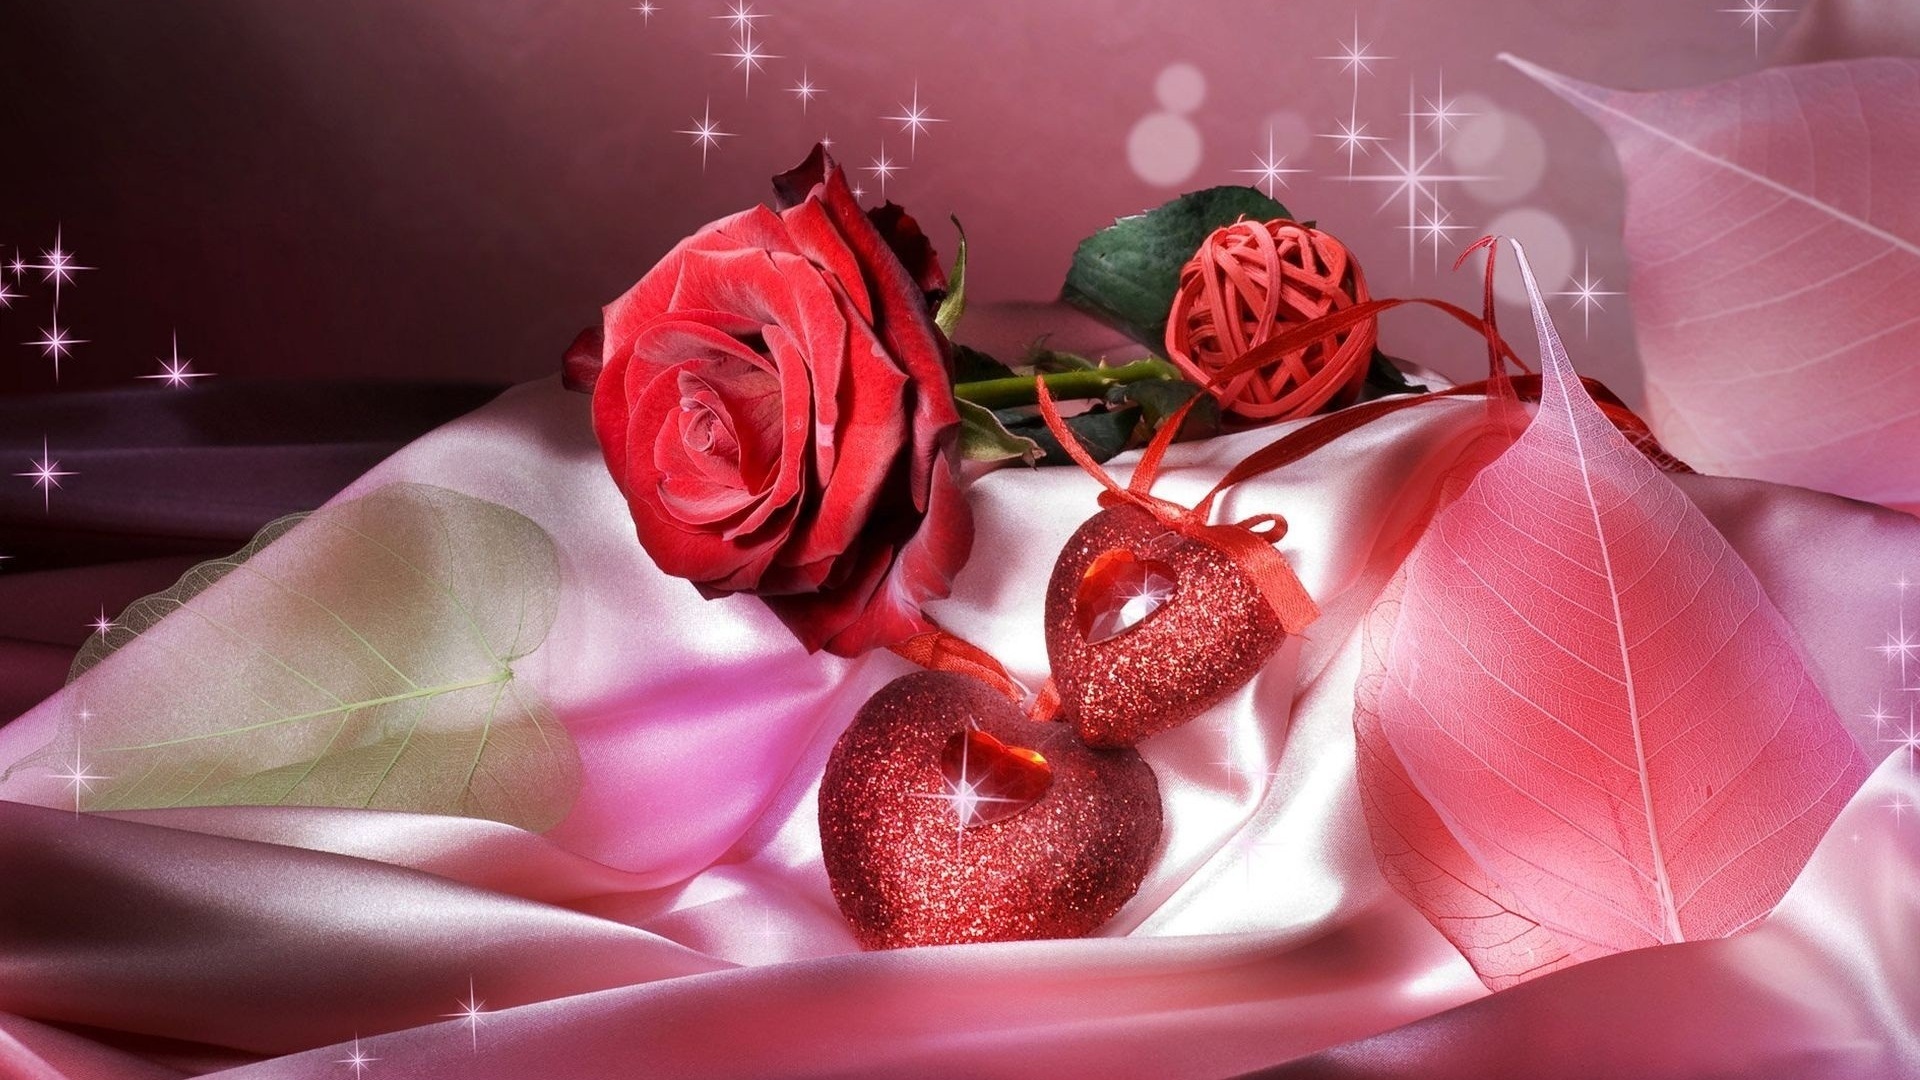 Red Valentine Roses HD Wallpaper Gallery